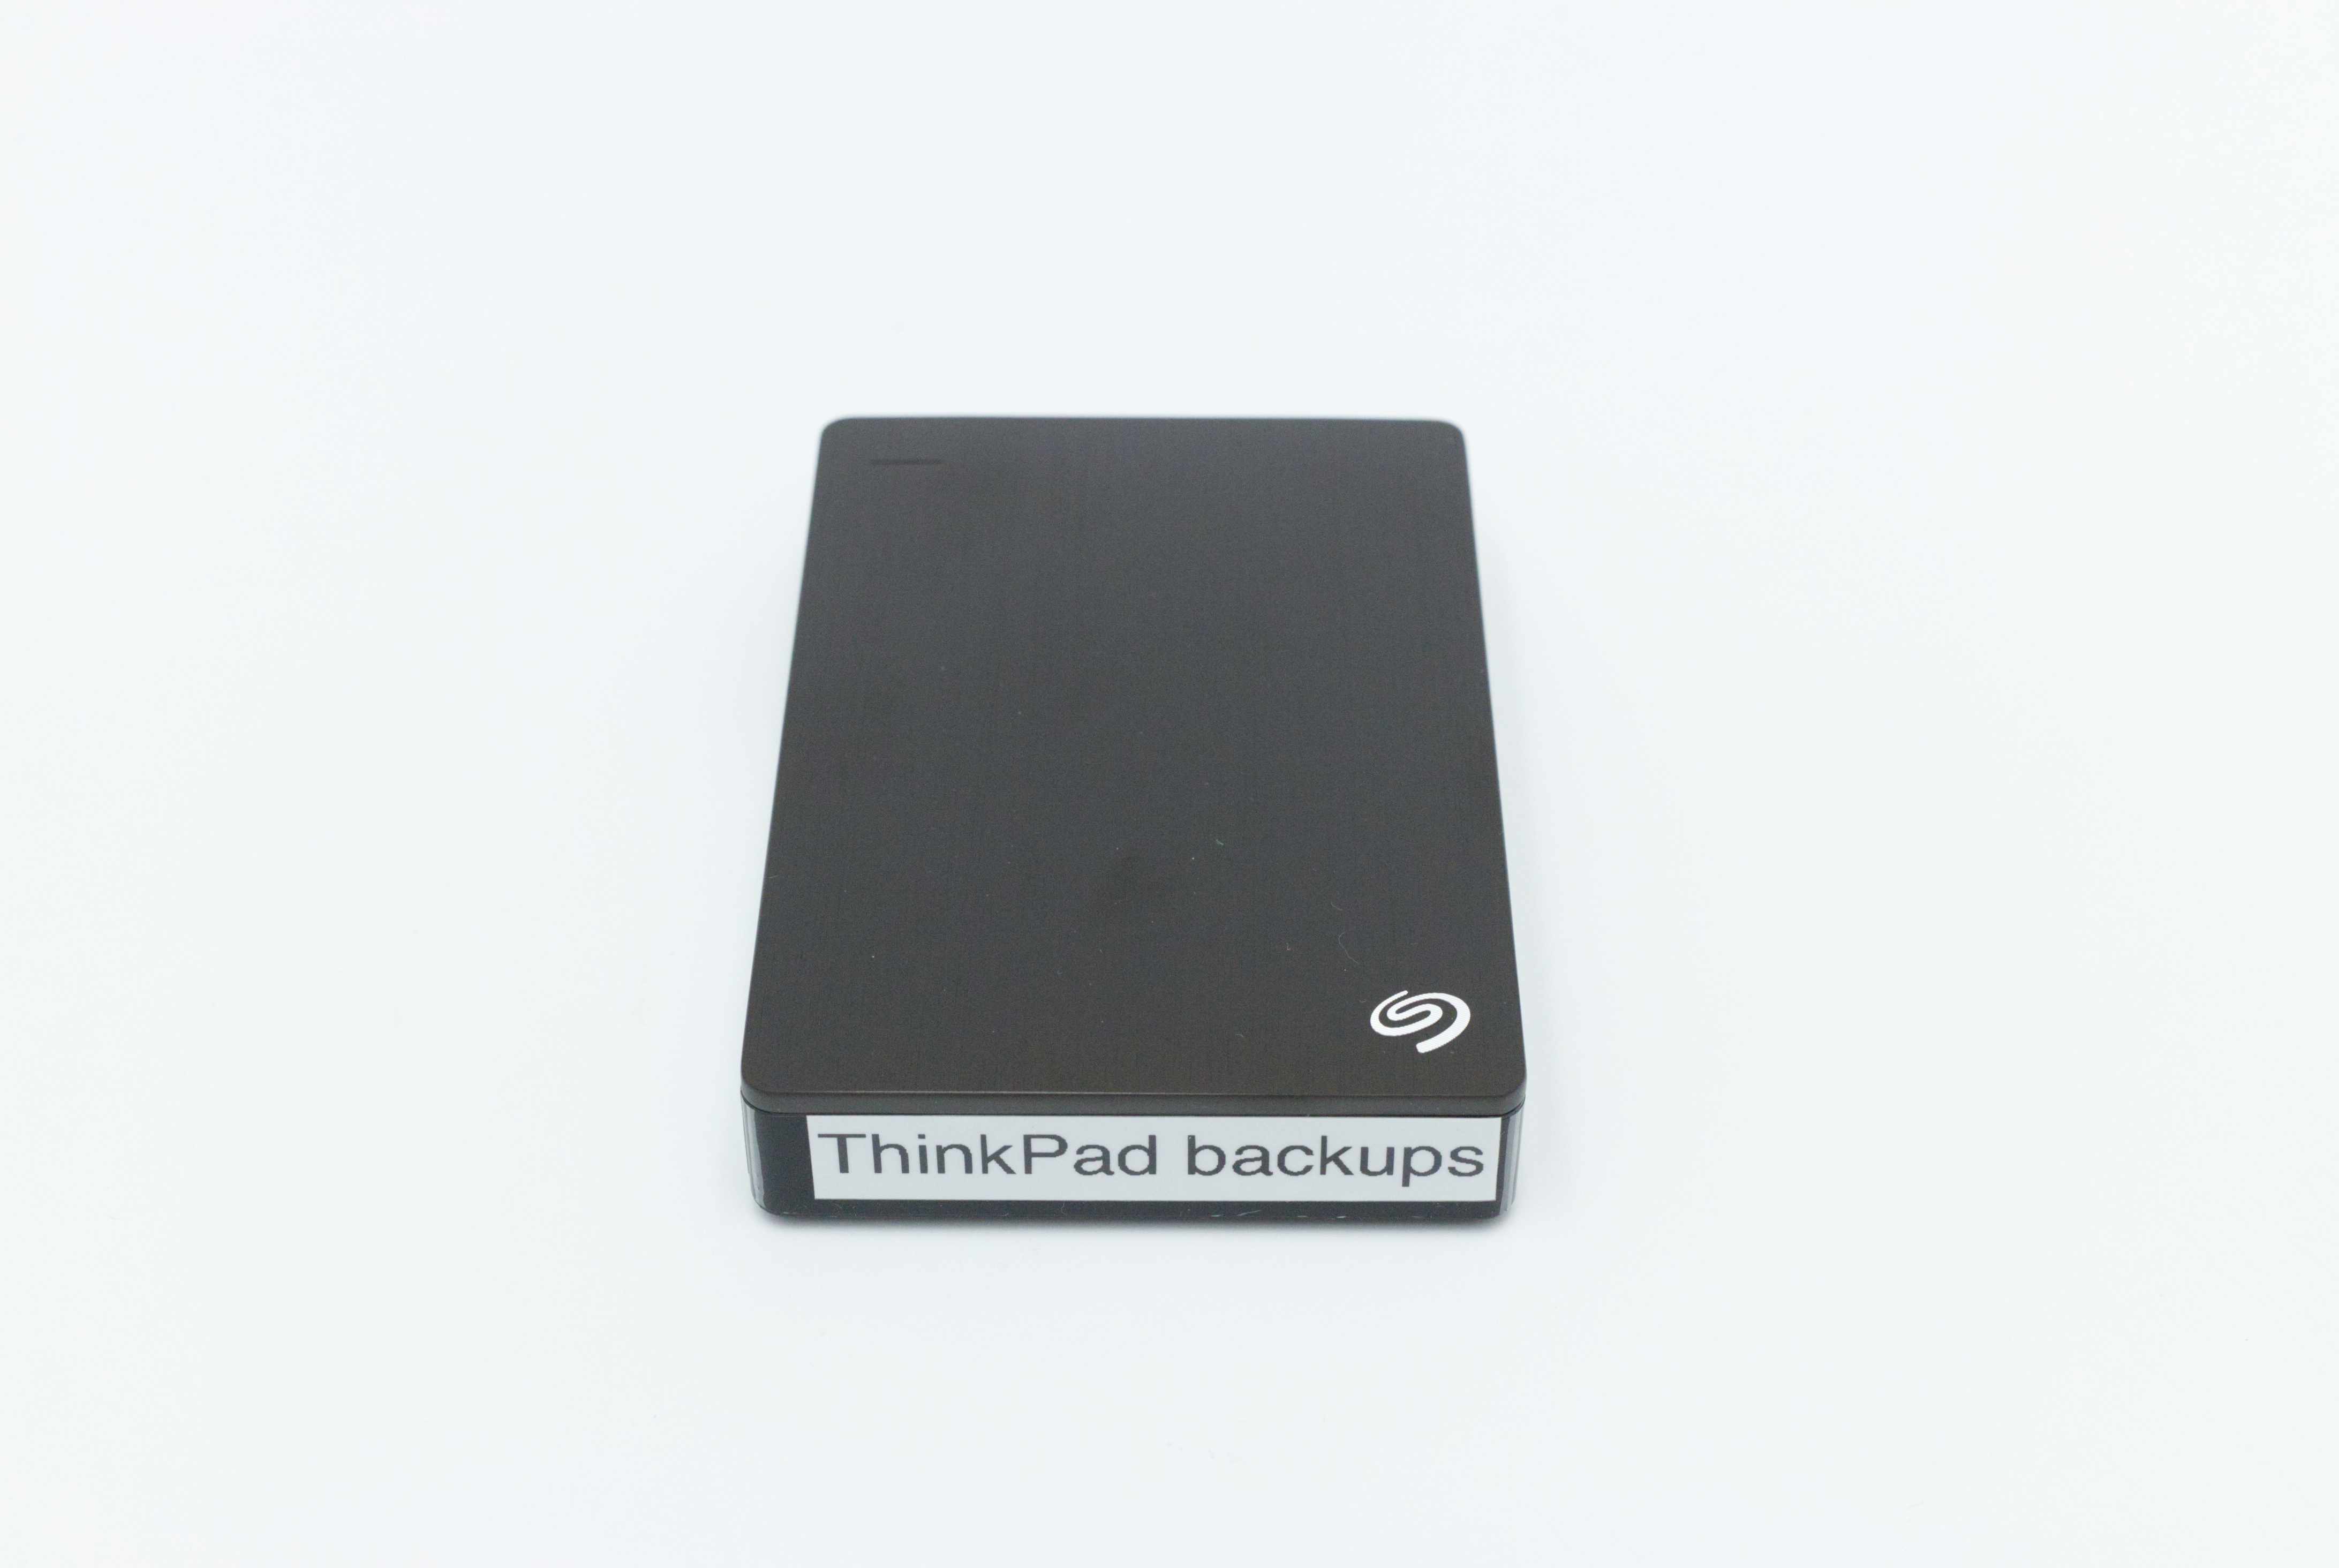 Front view of the real hard drive. The top face and front face are visible, and a label on the front reads “ThinkPad backups”.